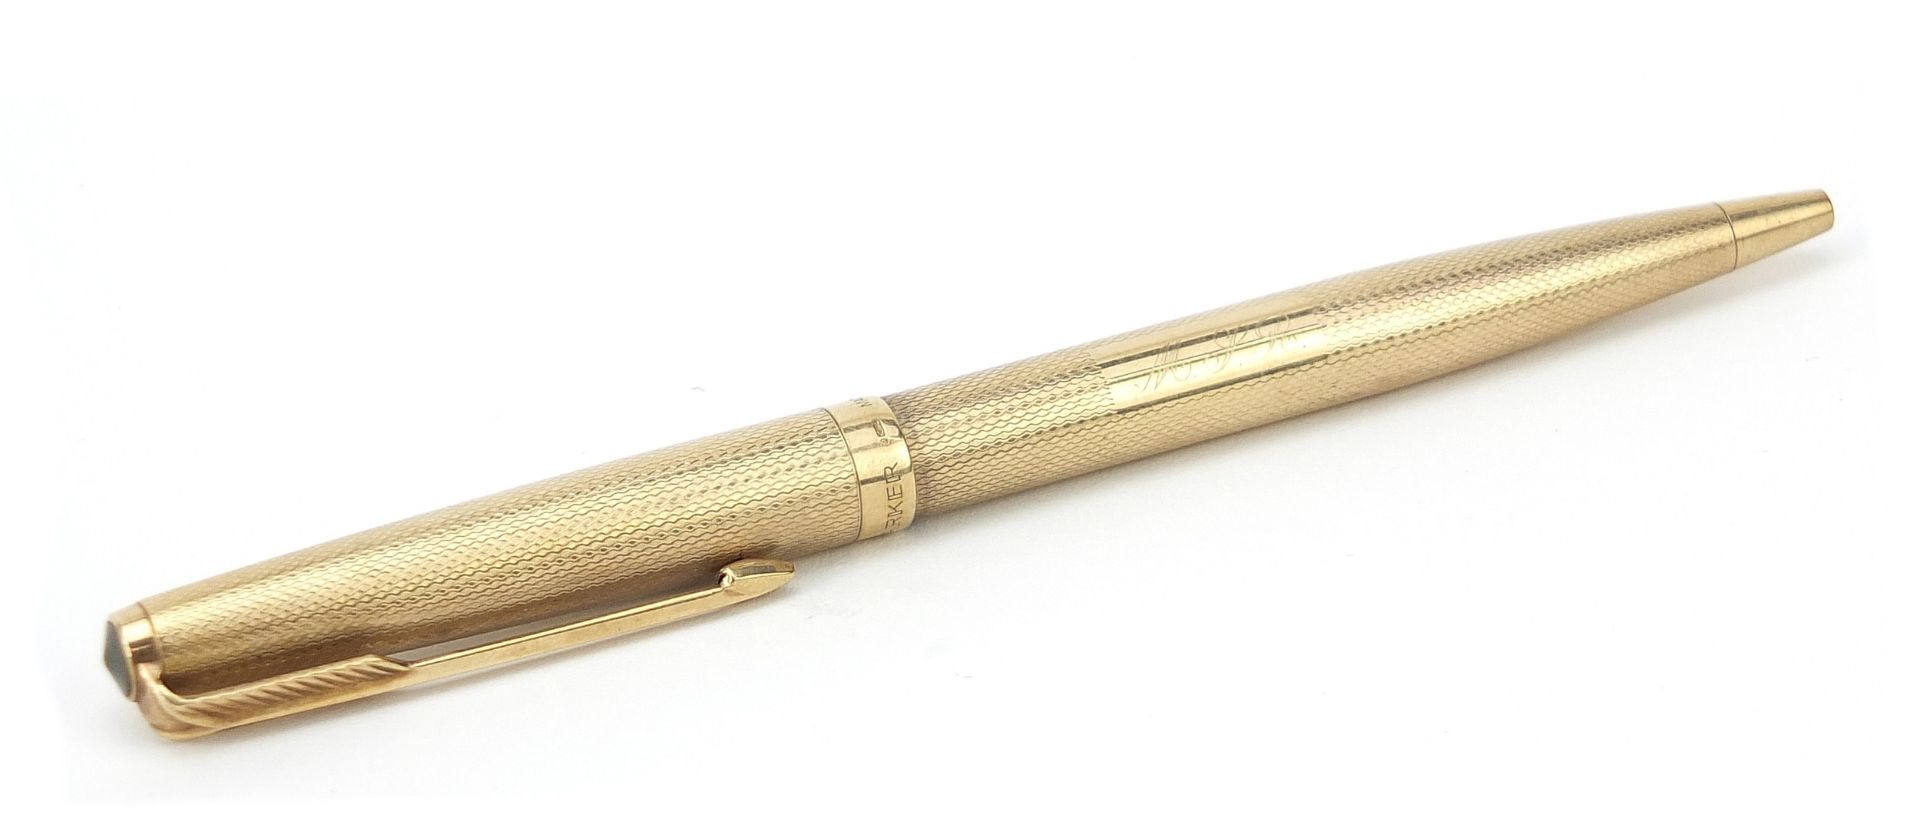 Parker, 9ct gold cased Biro pen with engine turned body, 12.8cm in length, 18.5g - Image 2 of 5